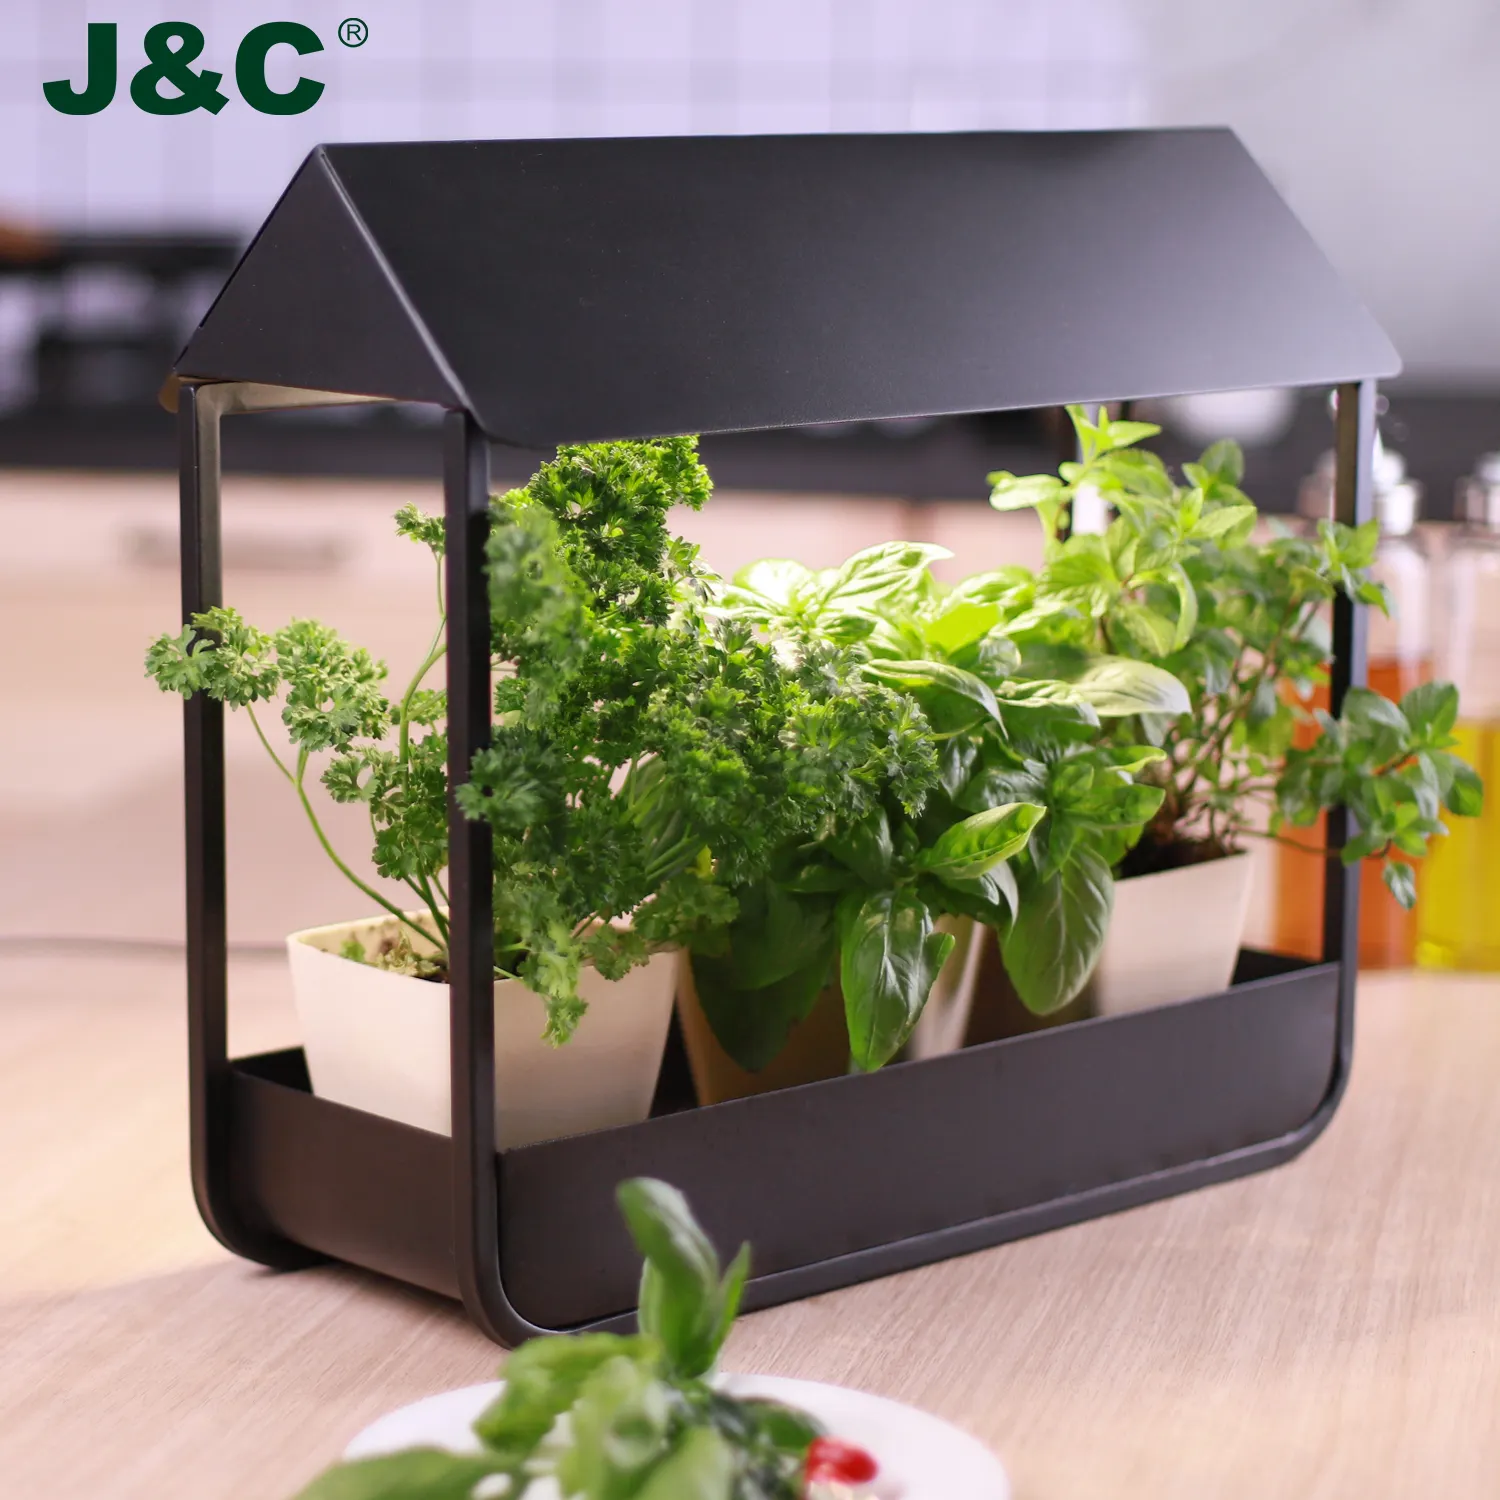 J & C Minigarden Mini Indoor <span class=keywords><strong>Tuin</strong></span> Self Watering <span class=keywords><strong>Led</strong></span> Planter Pod Nordic Metalen <span class=keywords><strong>Staal</strong></span> Keuken Indoor <span class=keywords><strong>Tuin</strong></span>